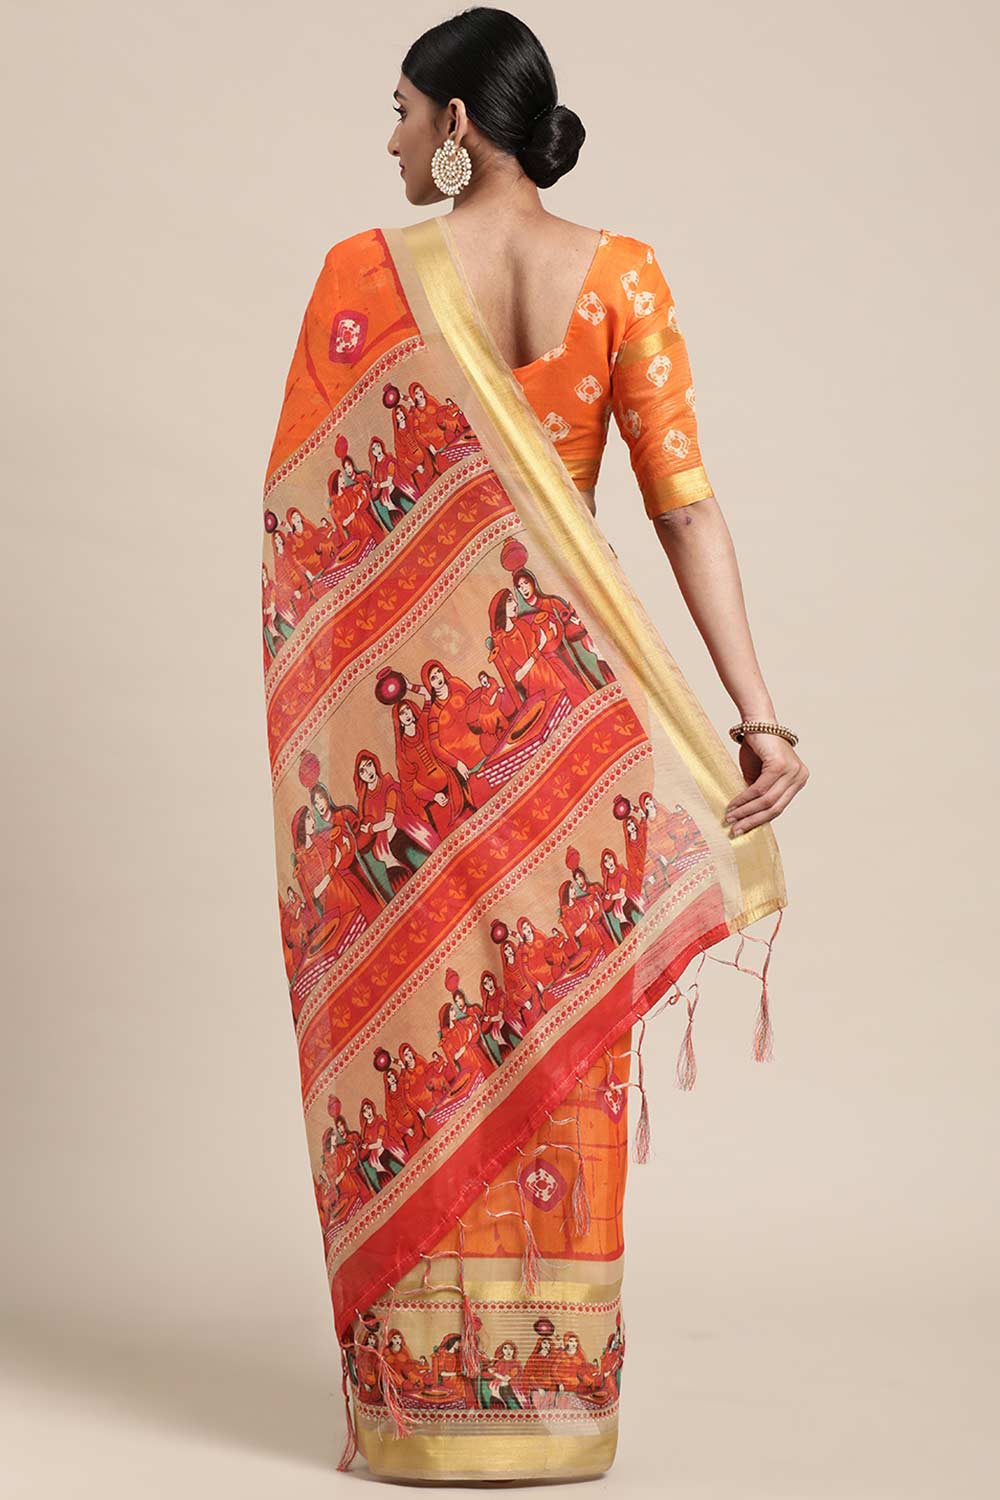 Shop Jyoti Orange Linen Blend Bandhani Print Taant One Minute Saree at best offer at our  Store - One Minute Saree